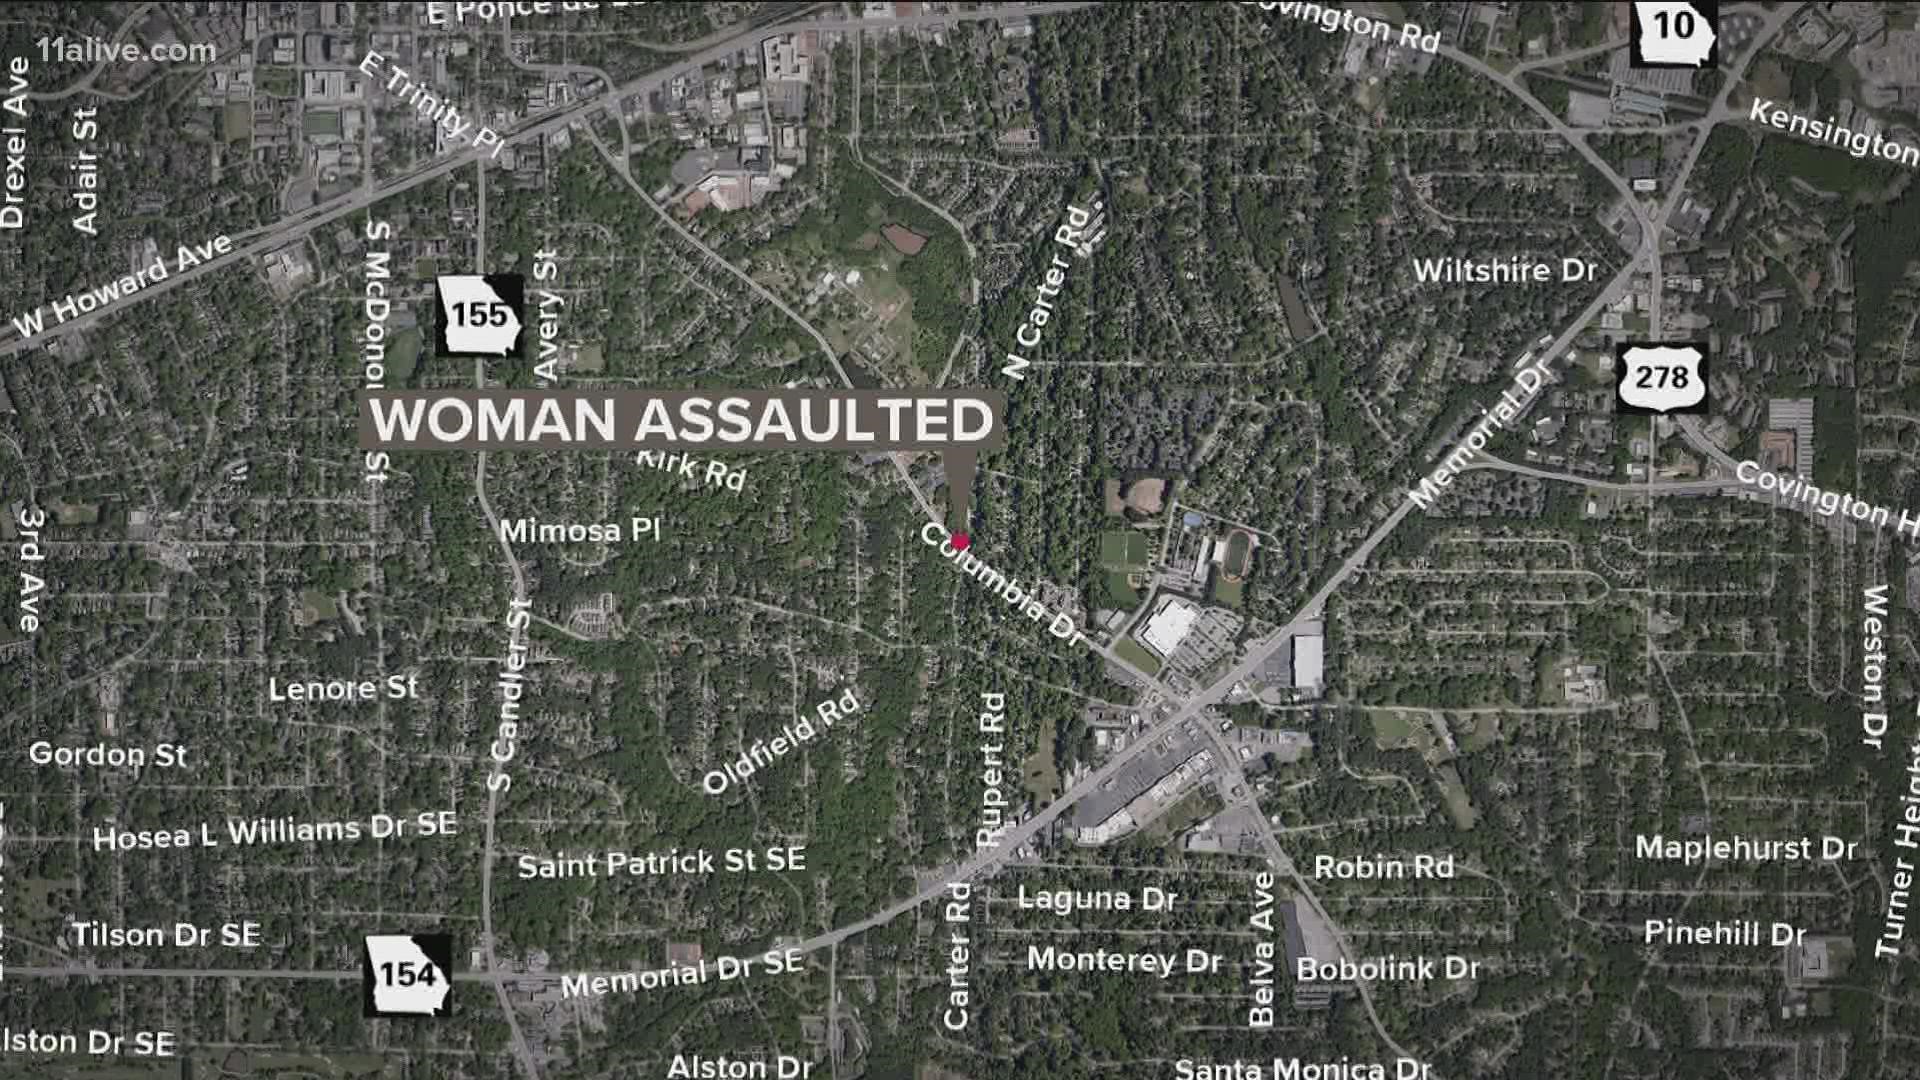 Authorities are investigating after a woman was attacked while on a trail in Decatur on Sunday.